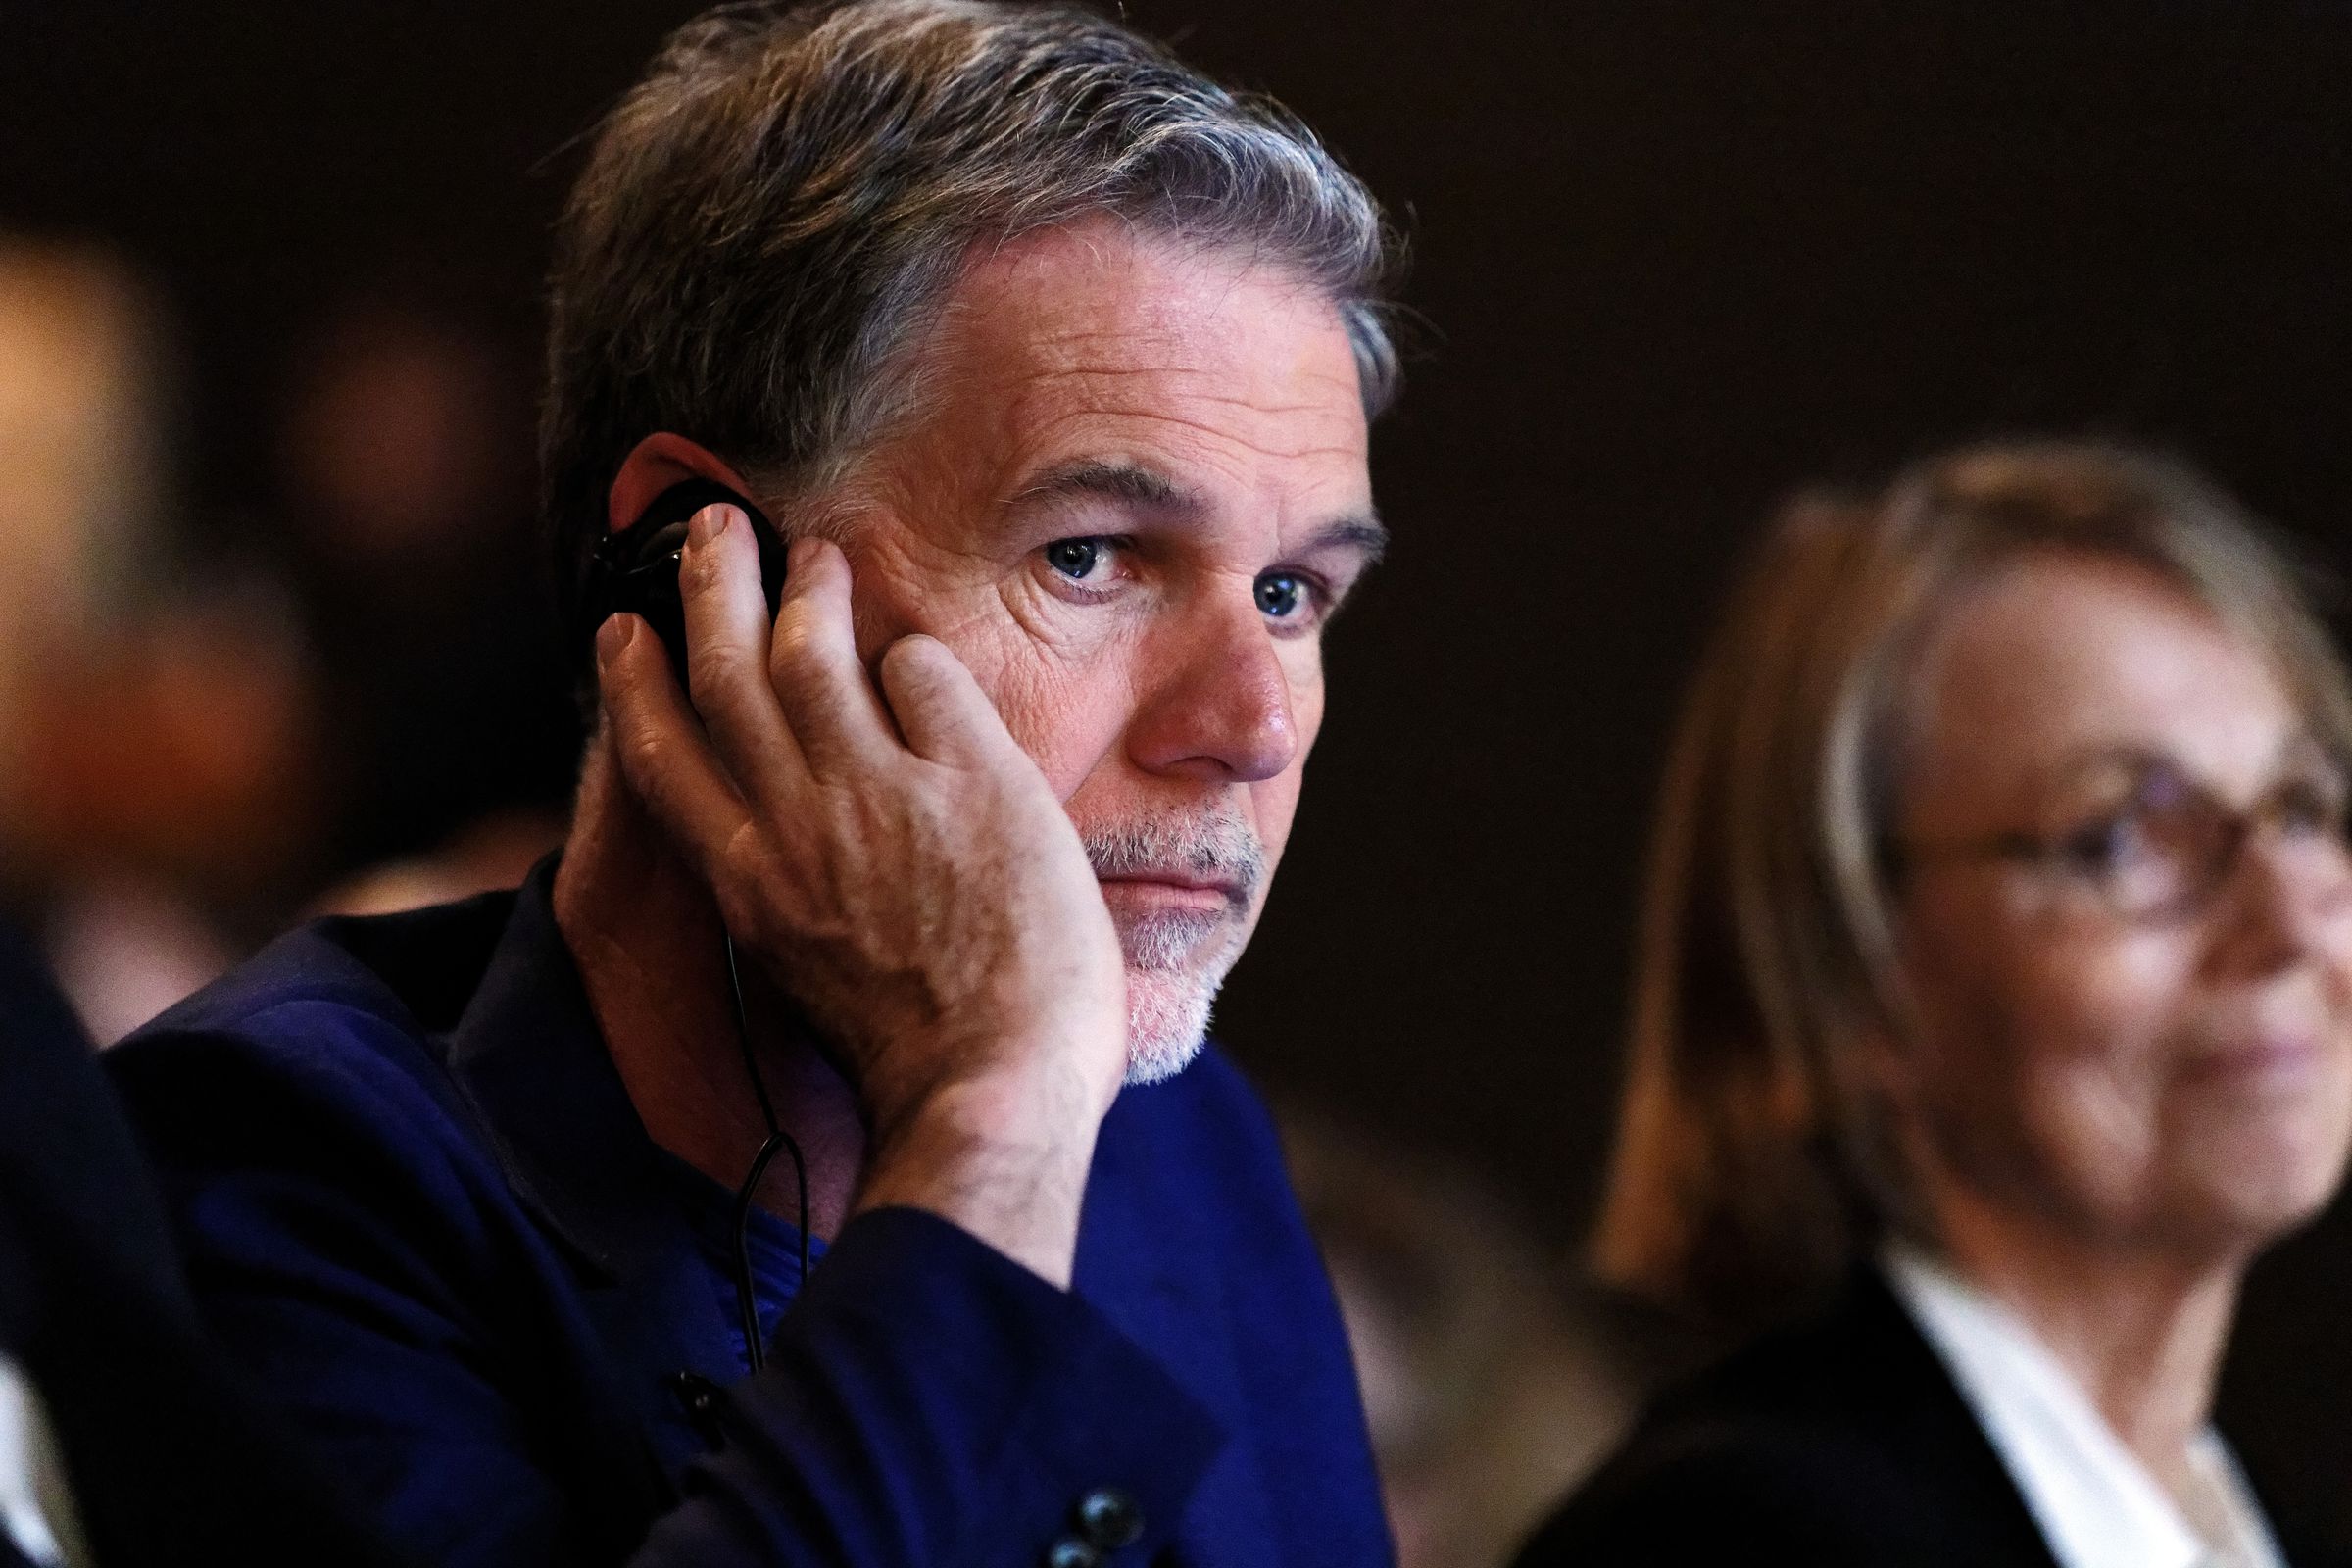 Netflix CEO Reed Hastings at a conference, with a concerned expression